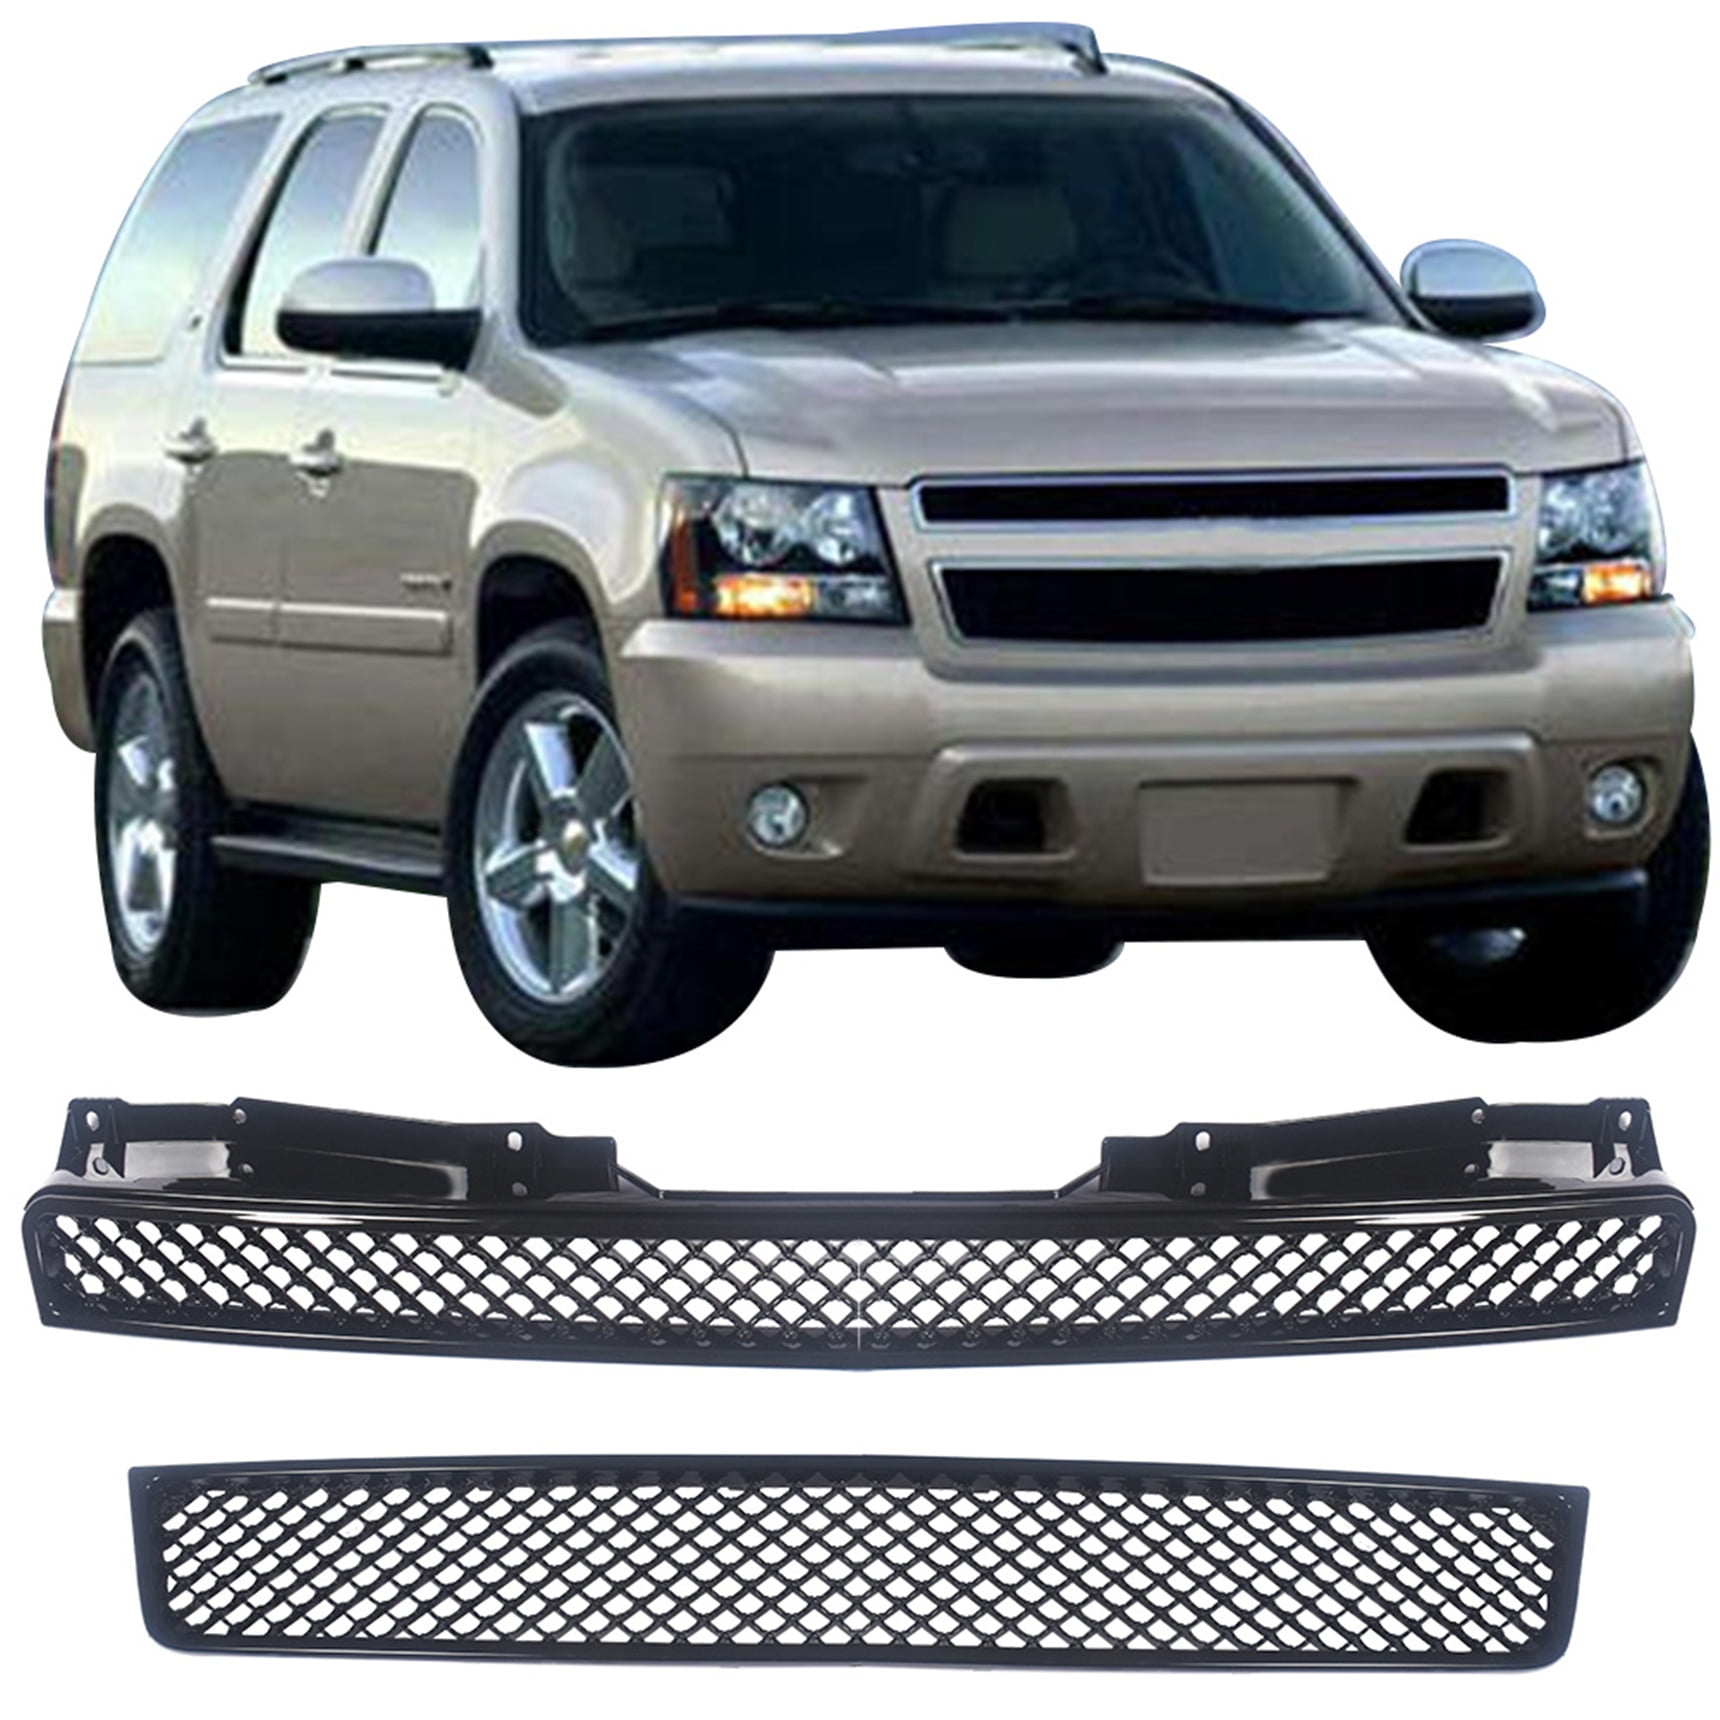 SEBLAFF Mesh Front Hood Bumper Grill Grille Black Replacement for Chevrolet  2007-2014 Tahoe suburban avalanche GM1200596 GM1200563 GM1200590